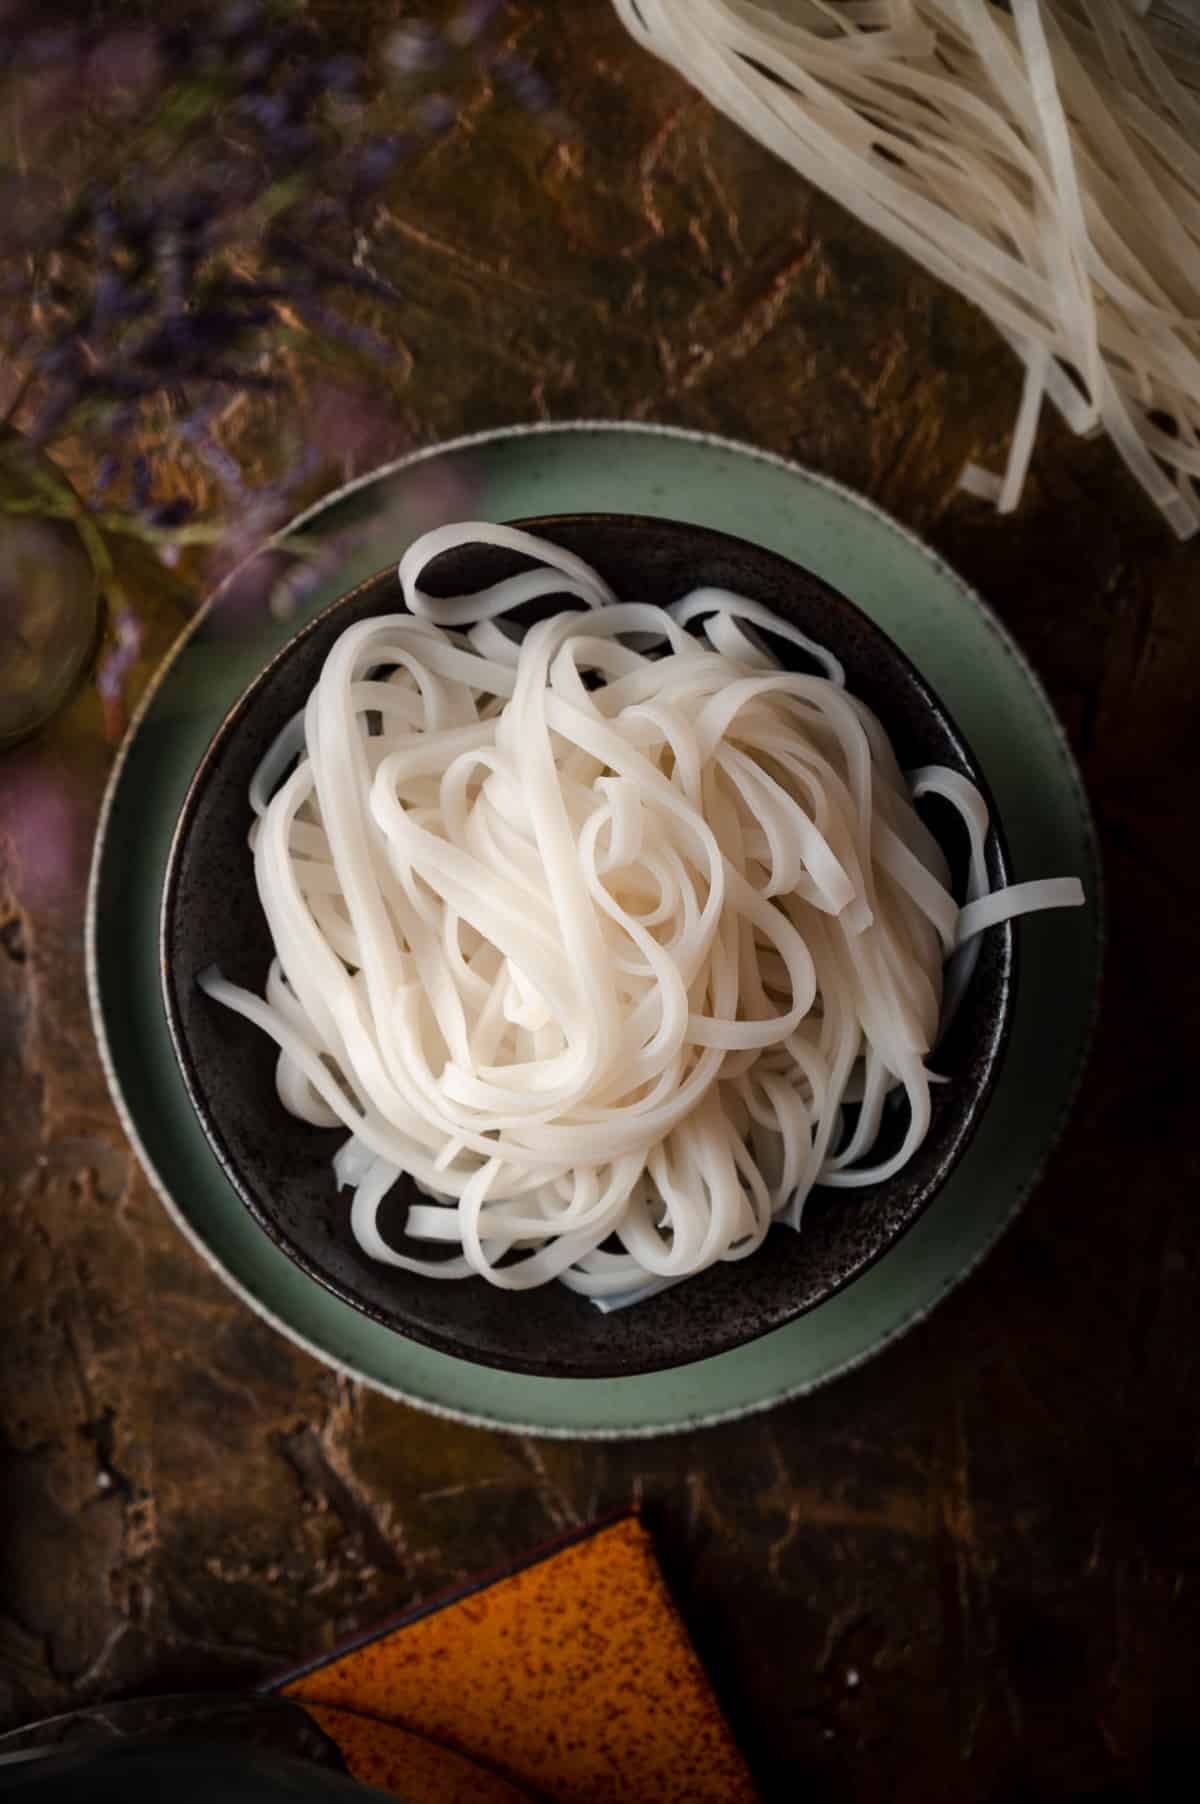 Flat lay image of a black bowl on top of a green plate filled with rice noodles.